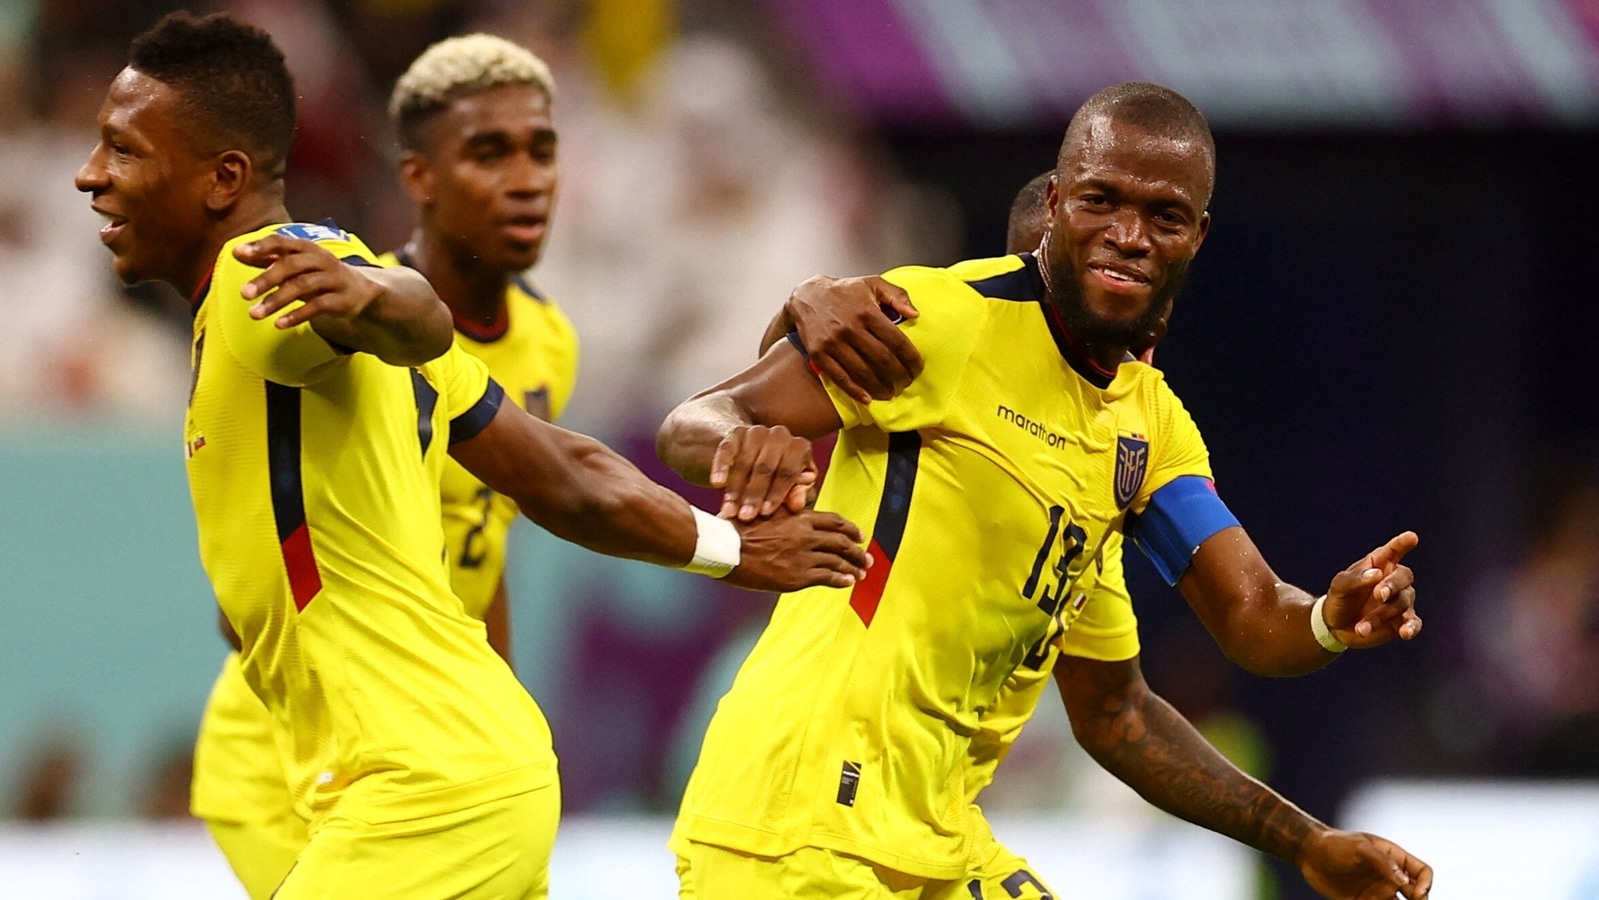 FIFA World Cup 2022 Qatar: Many firsts in this FIFA edition  FIFA World  Cup 2022 Qatar vs Ecuador squad, schedule dates, opening ceremony time,  teams, broadcast in India, Qatar stadiums, tickets